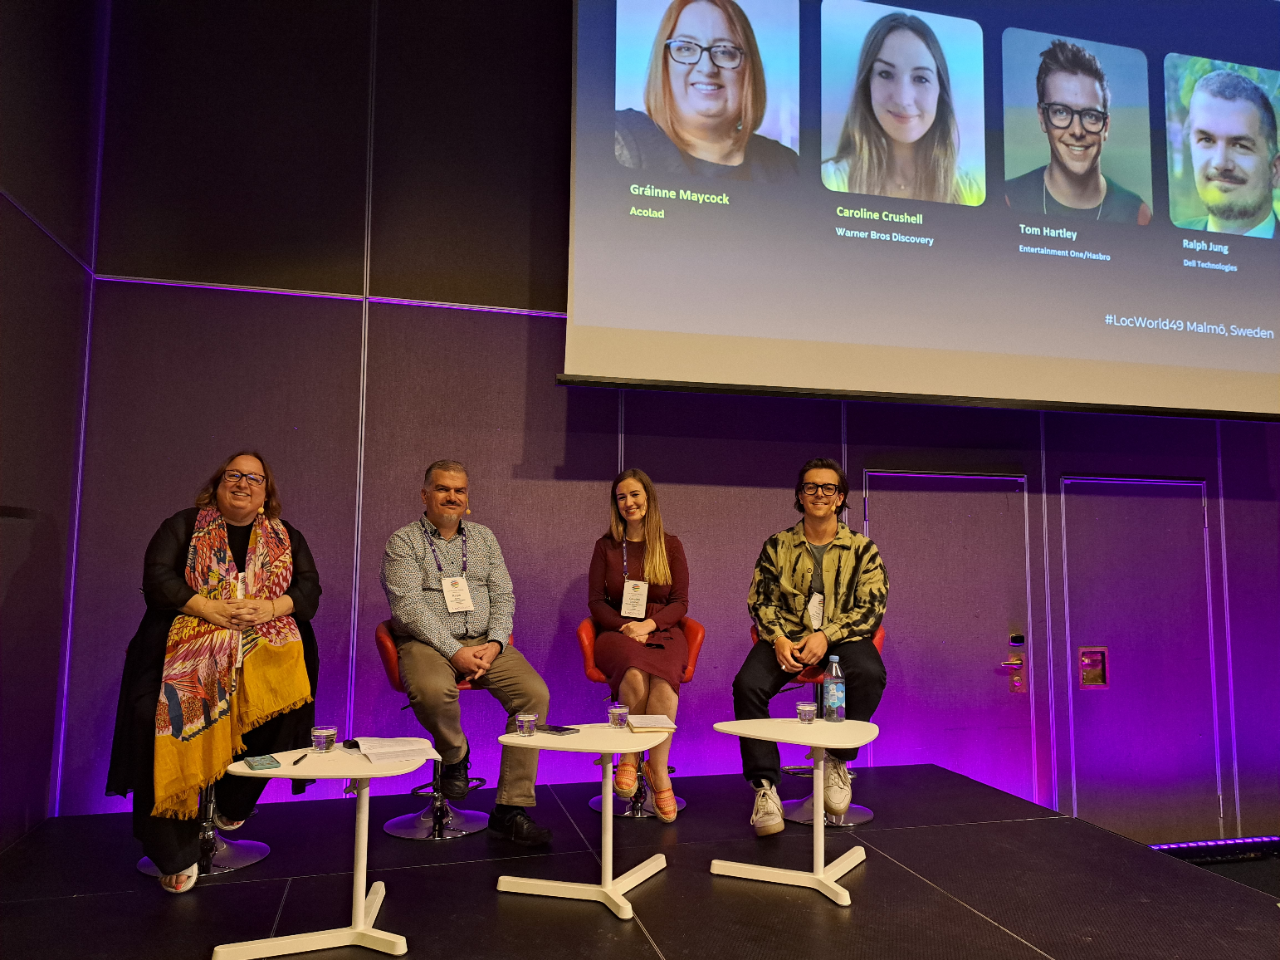 Gráinne Maycock hosting "How localization is driving growth in the entertainment industry" with Warner Bros, Hasbro and Dell at LocWorld49, Malmo